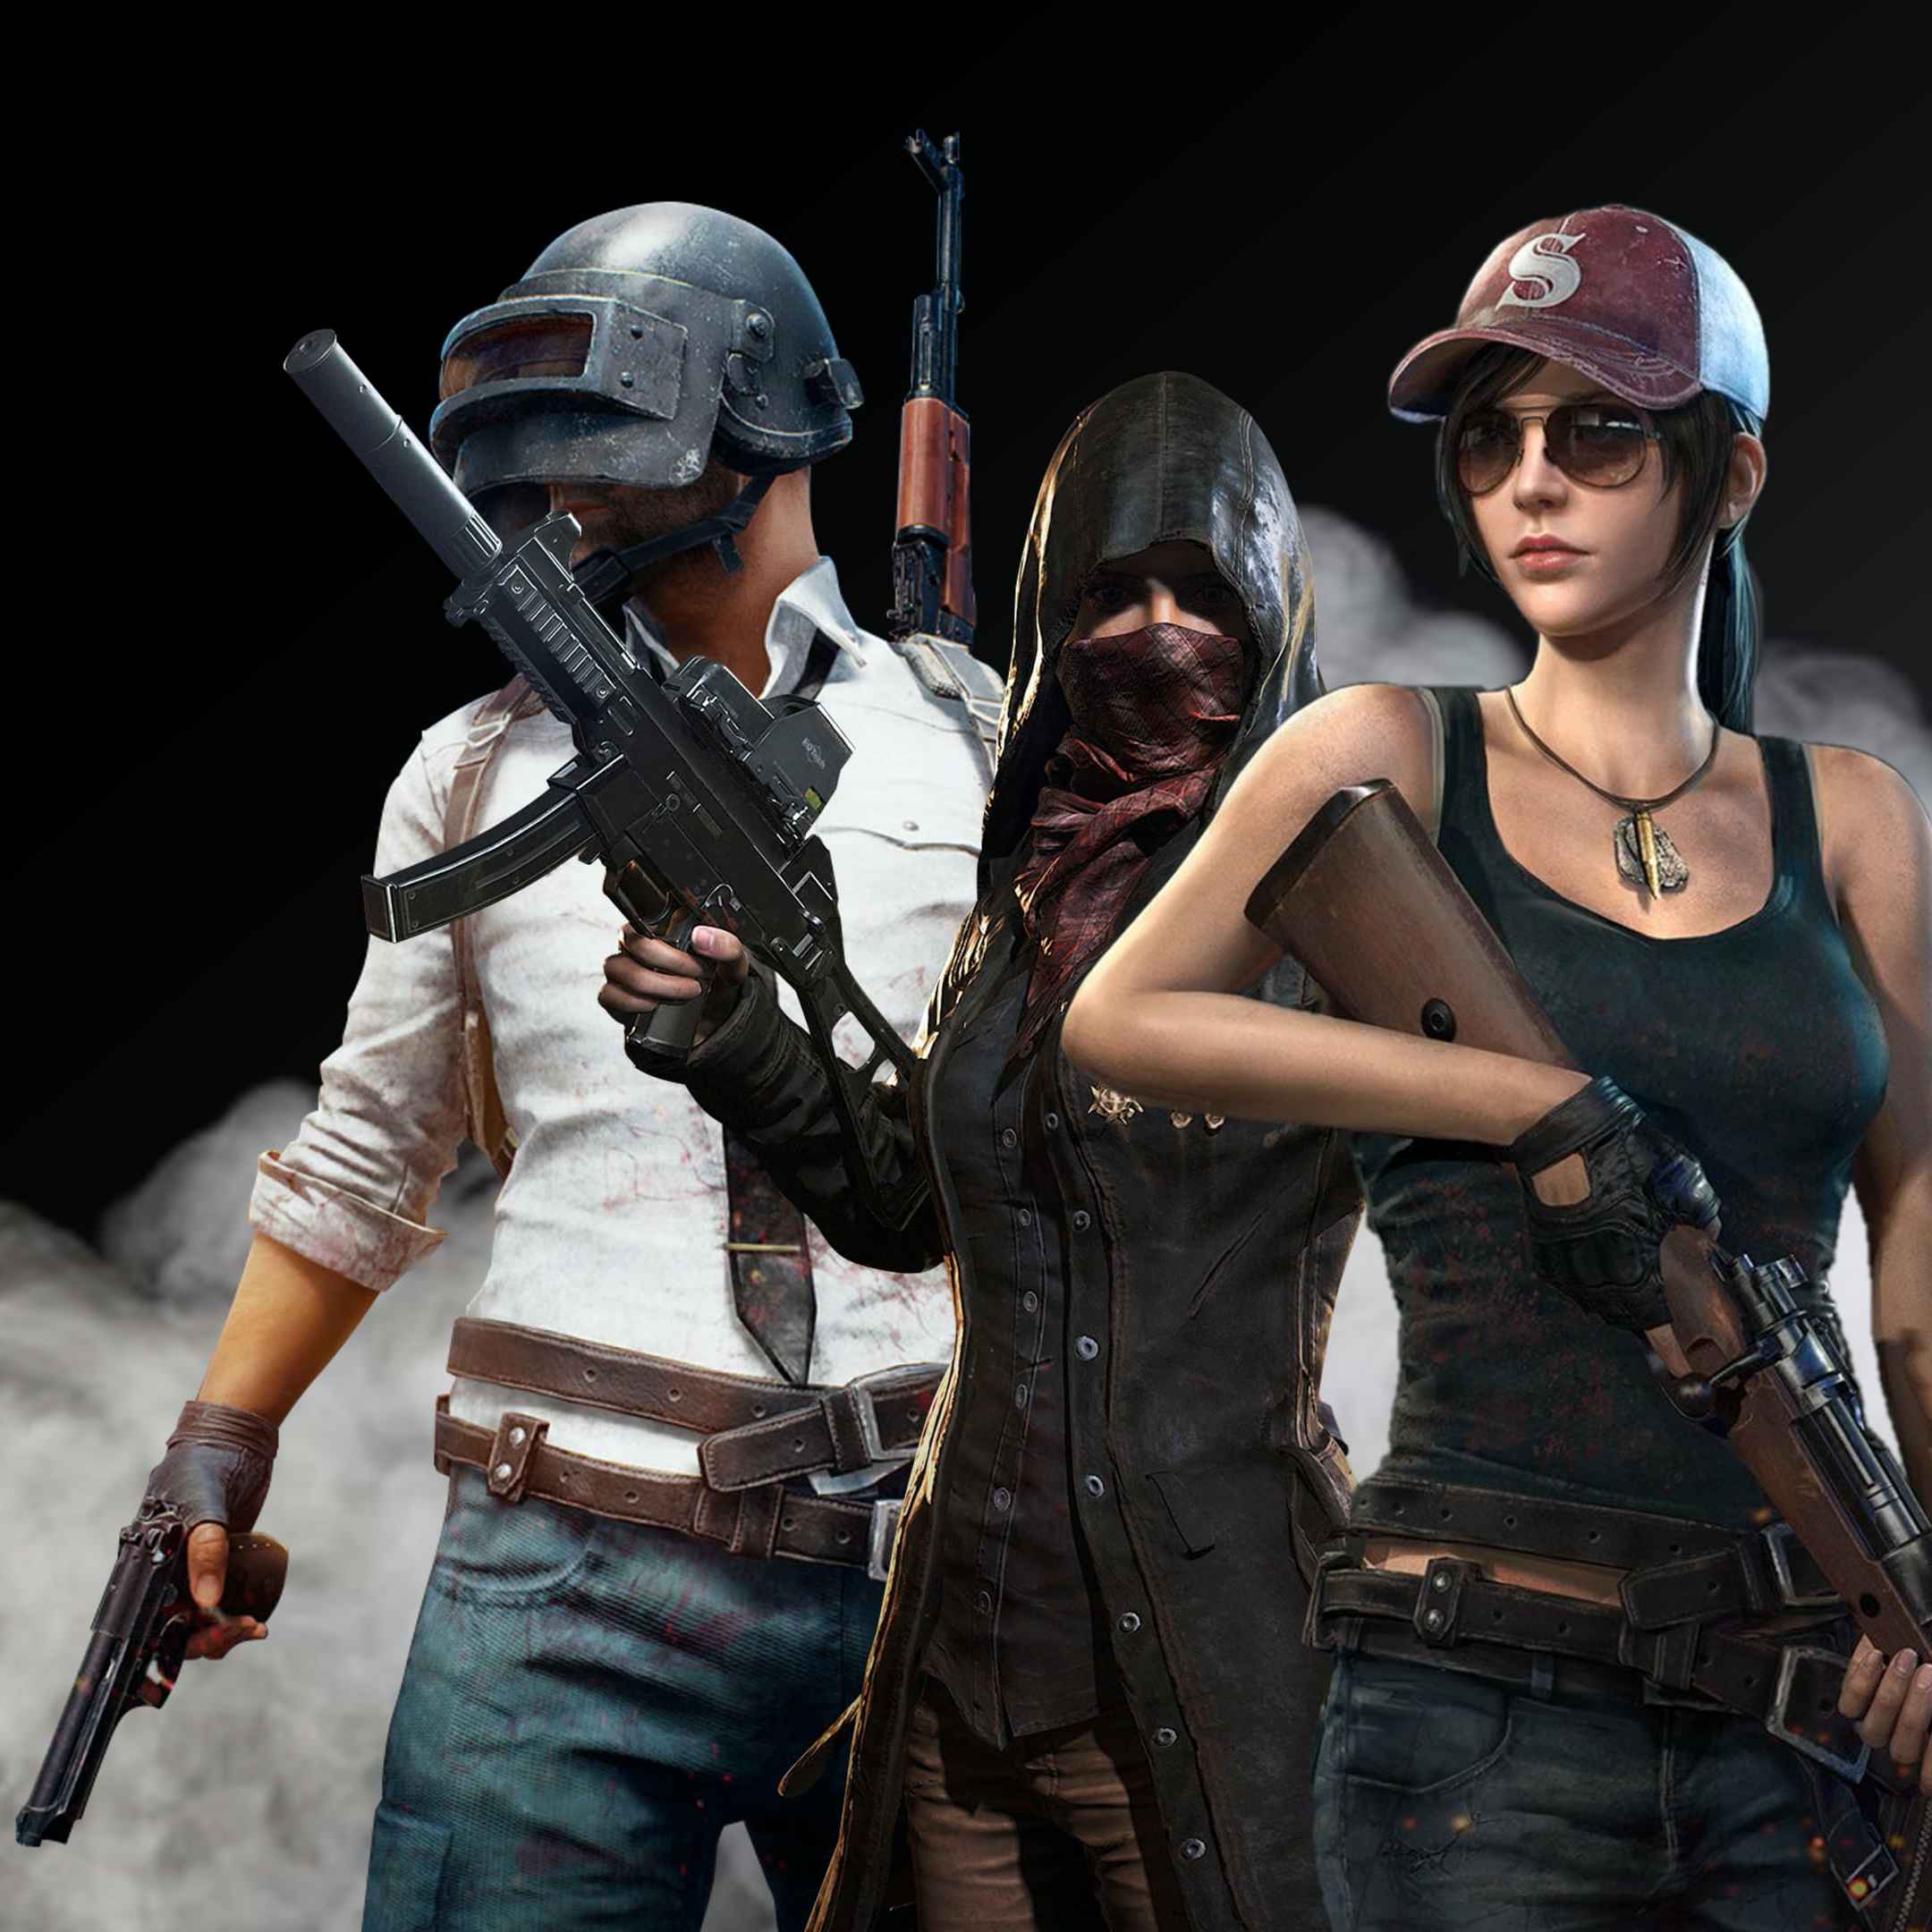 Panzerfaust and Motor Glider: Newest Update to be Featured on PUBG Mobile 1.3